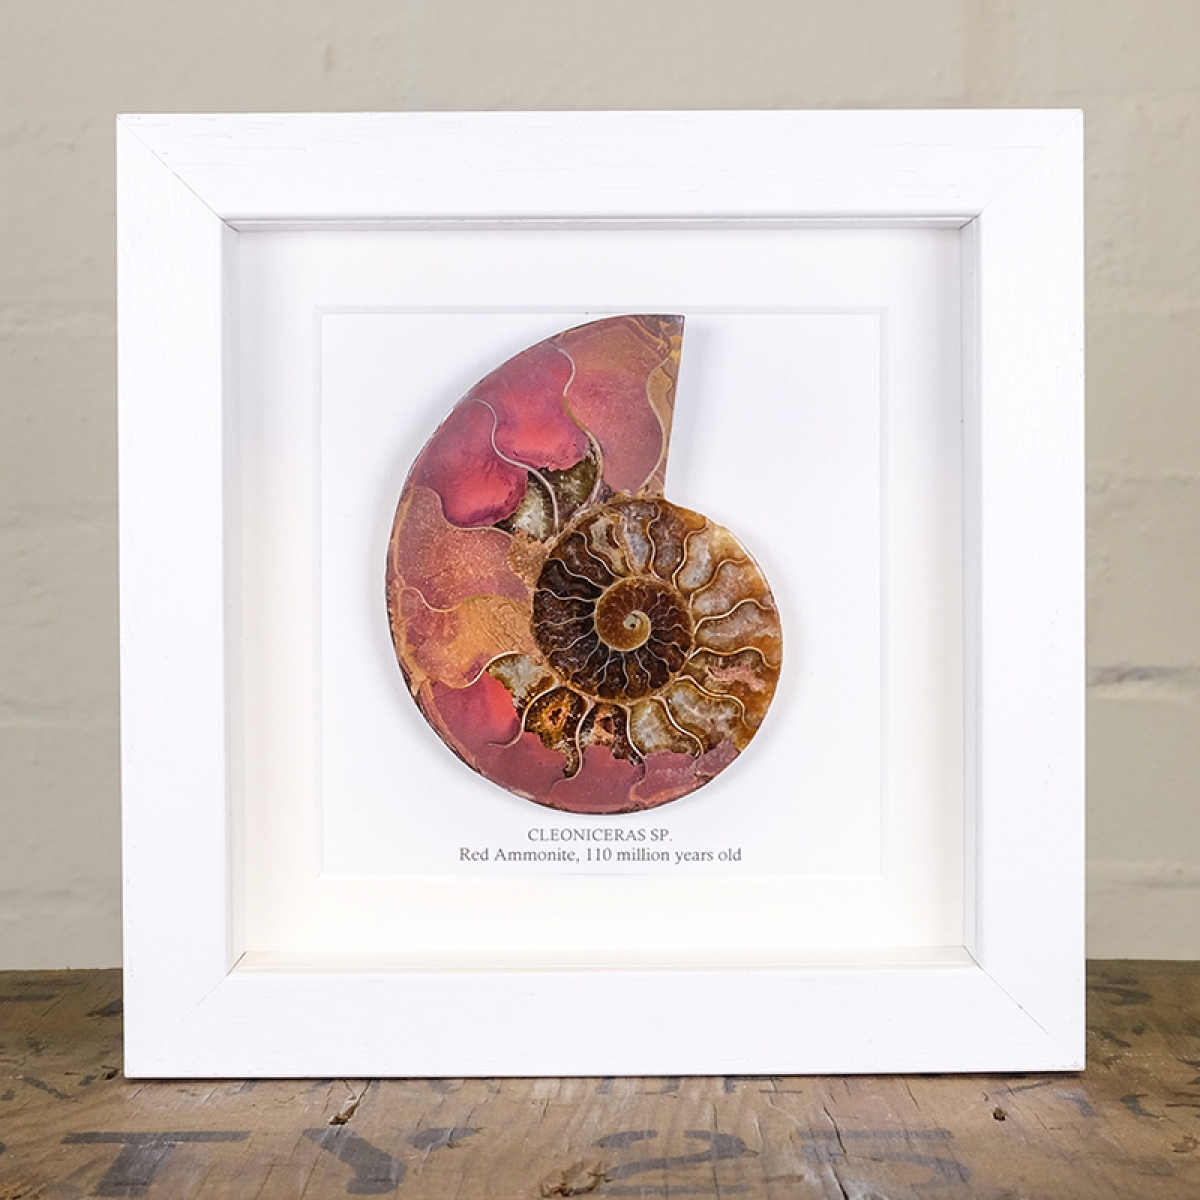 Rare Red Ammonite Cut and Polished Fossil in Box Frame (Cleoniceras sp)